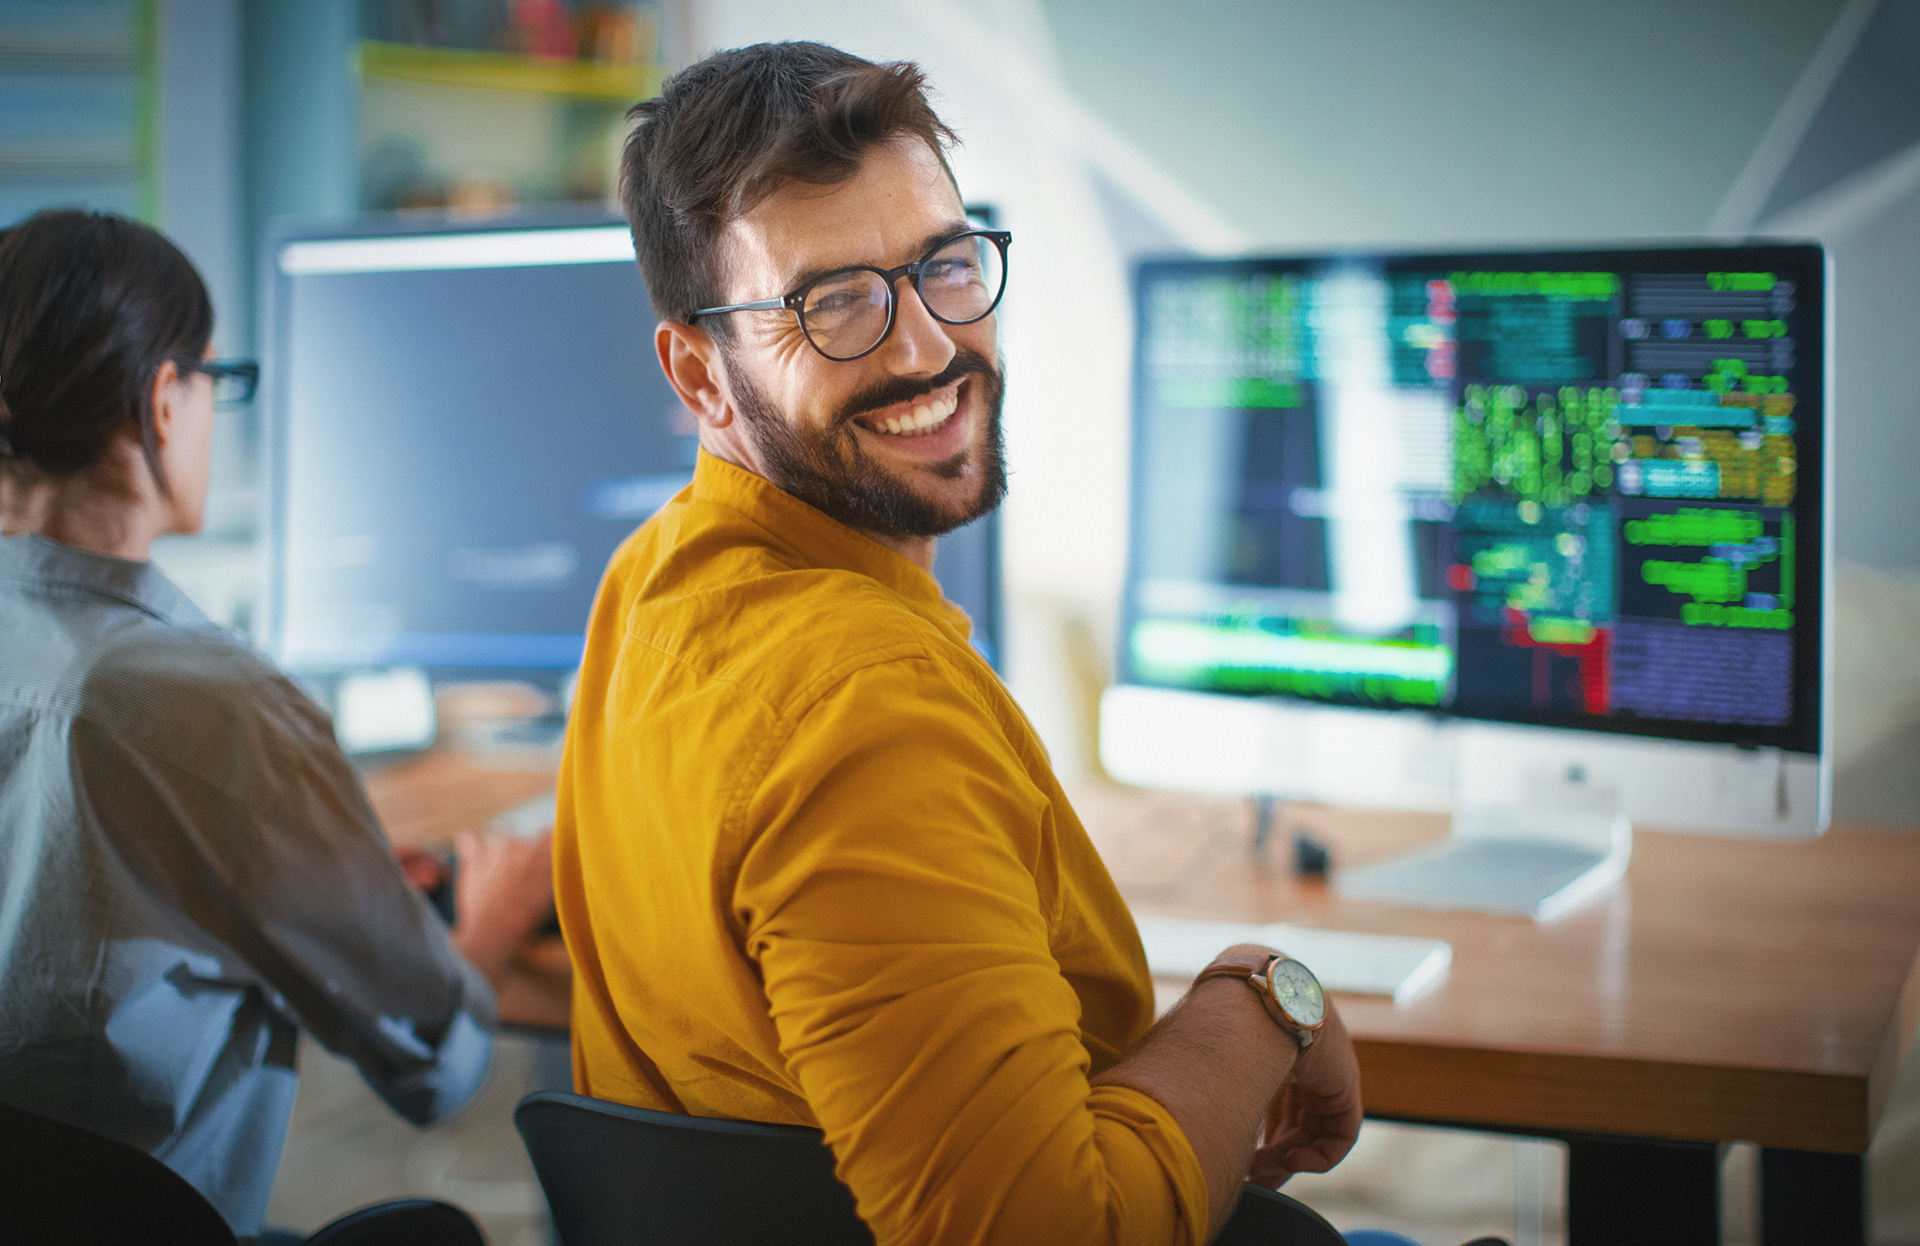 Software developer smiling at camera while working on code